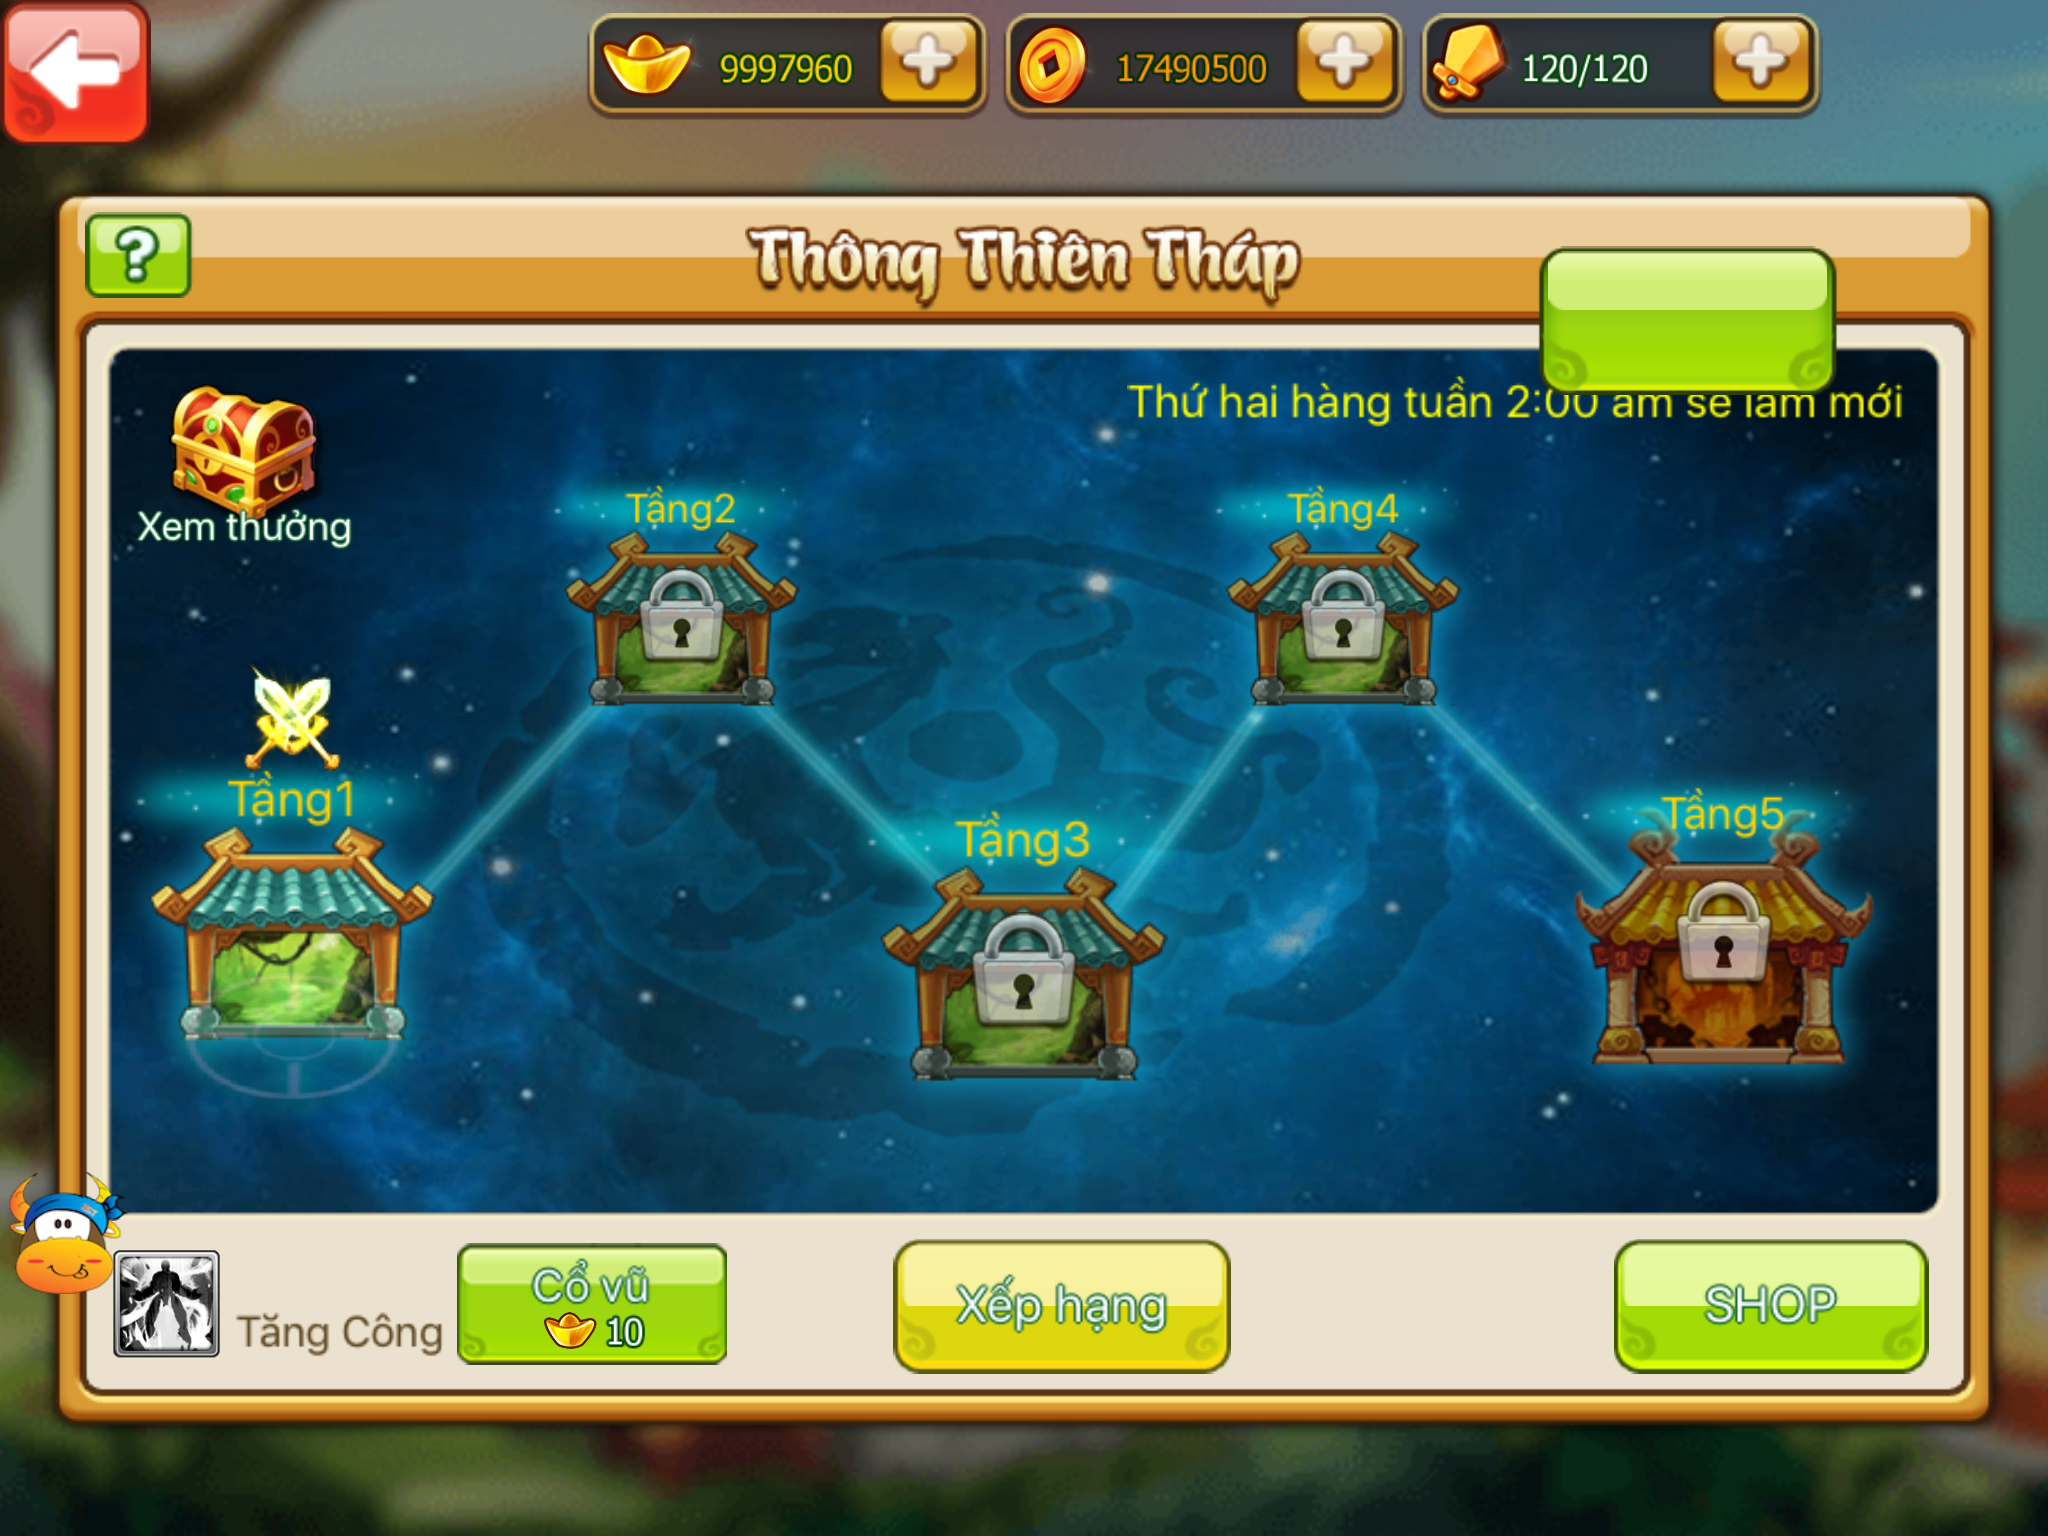 2game-25-9-thaooidungchay-32.png (2048×1536)